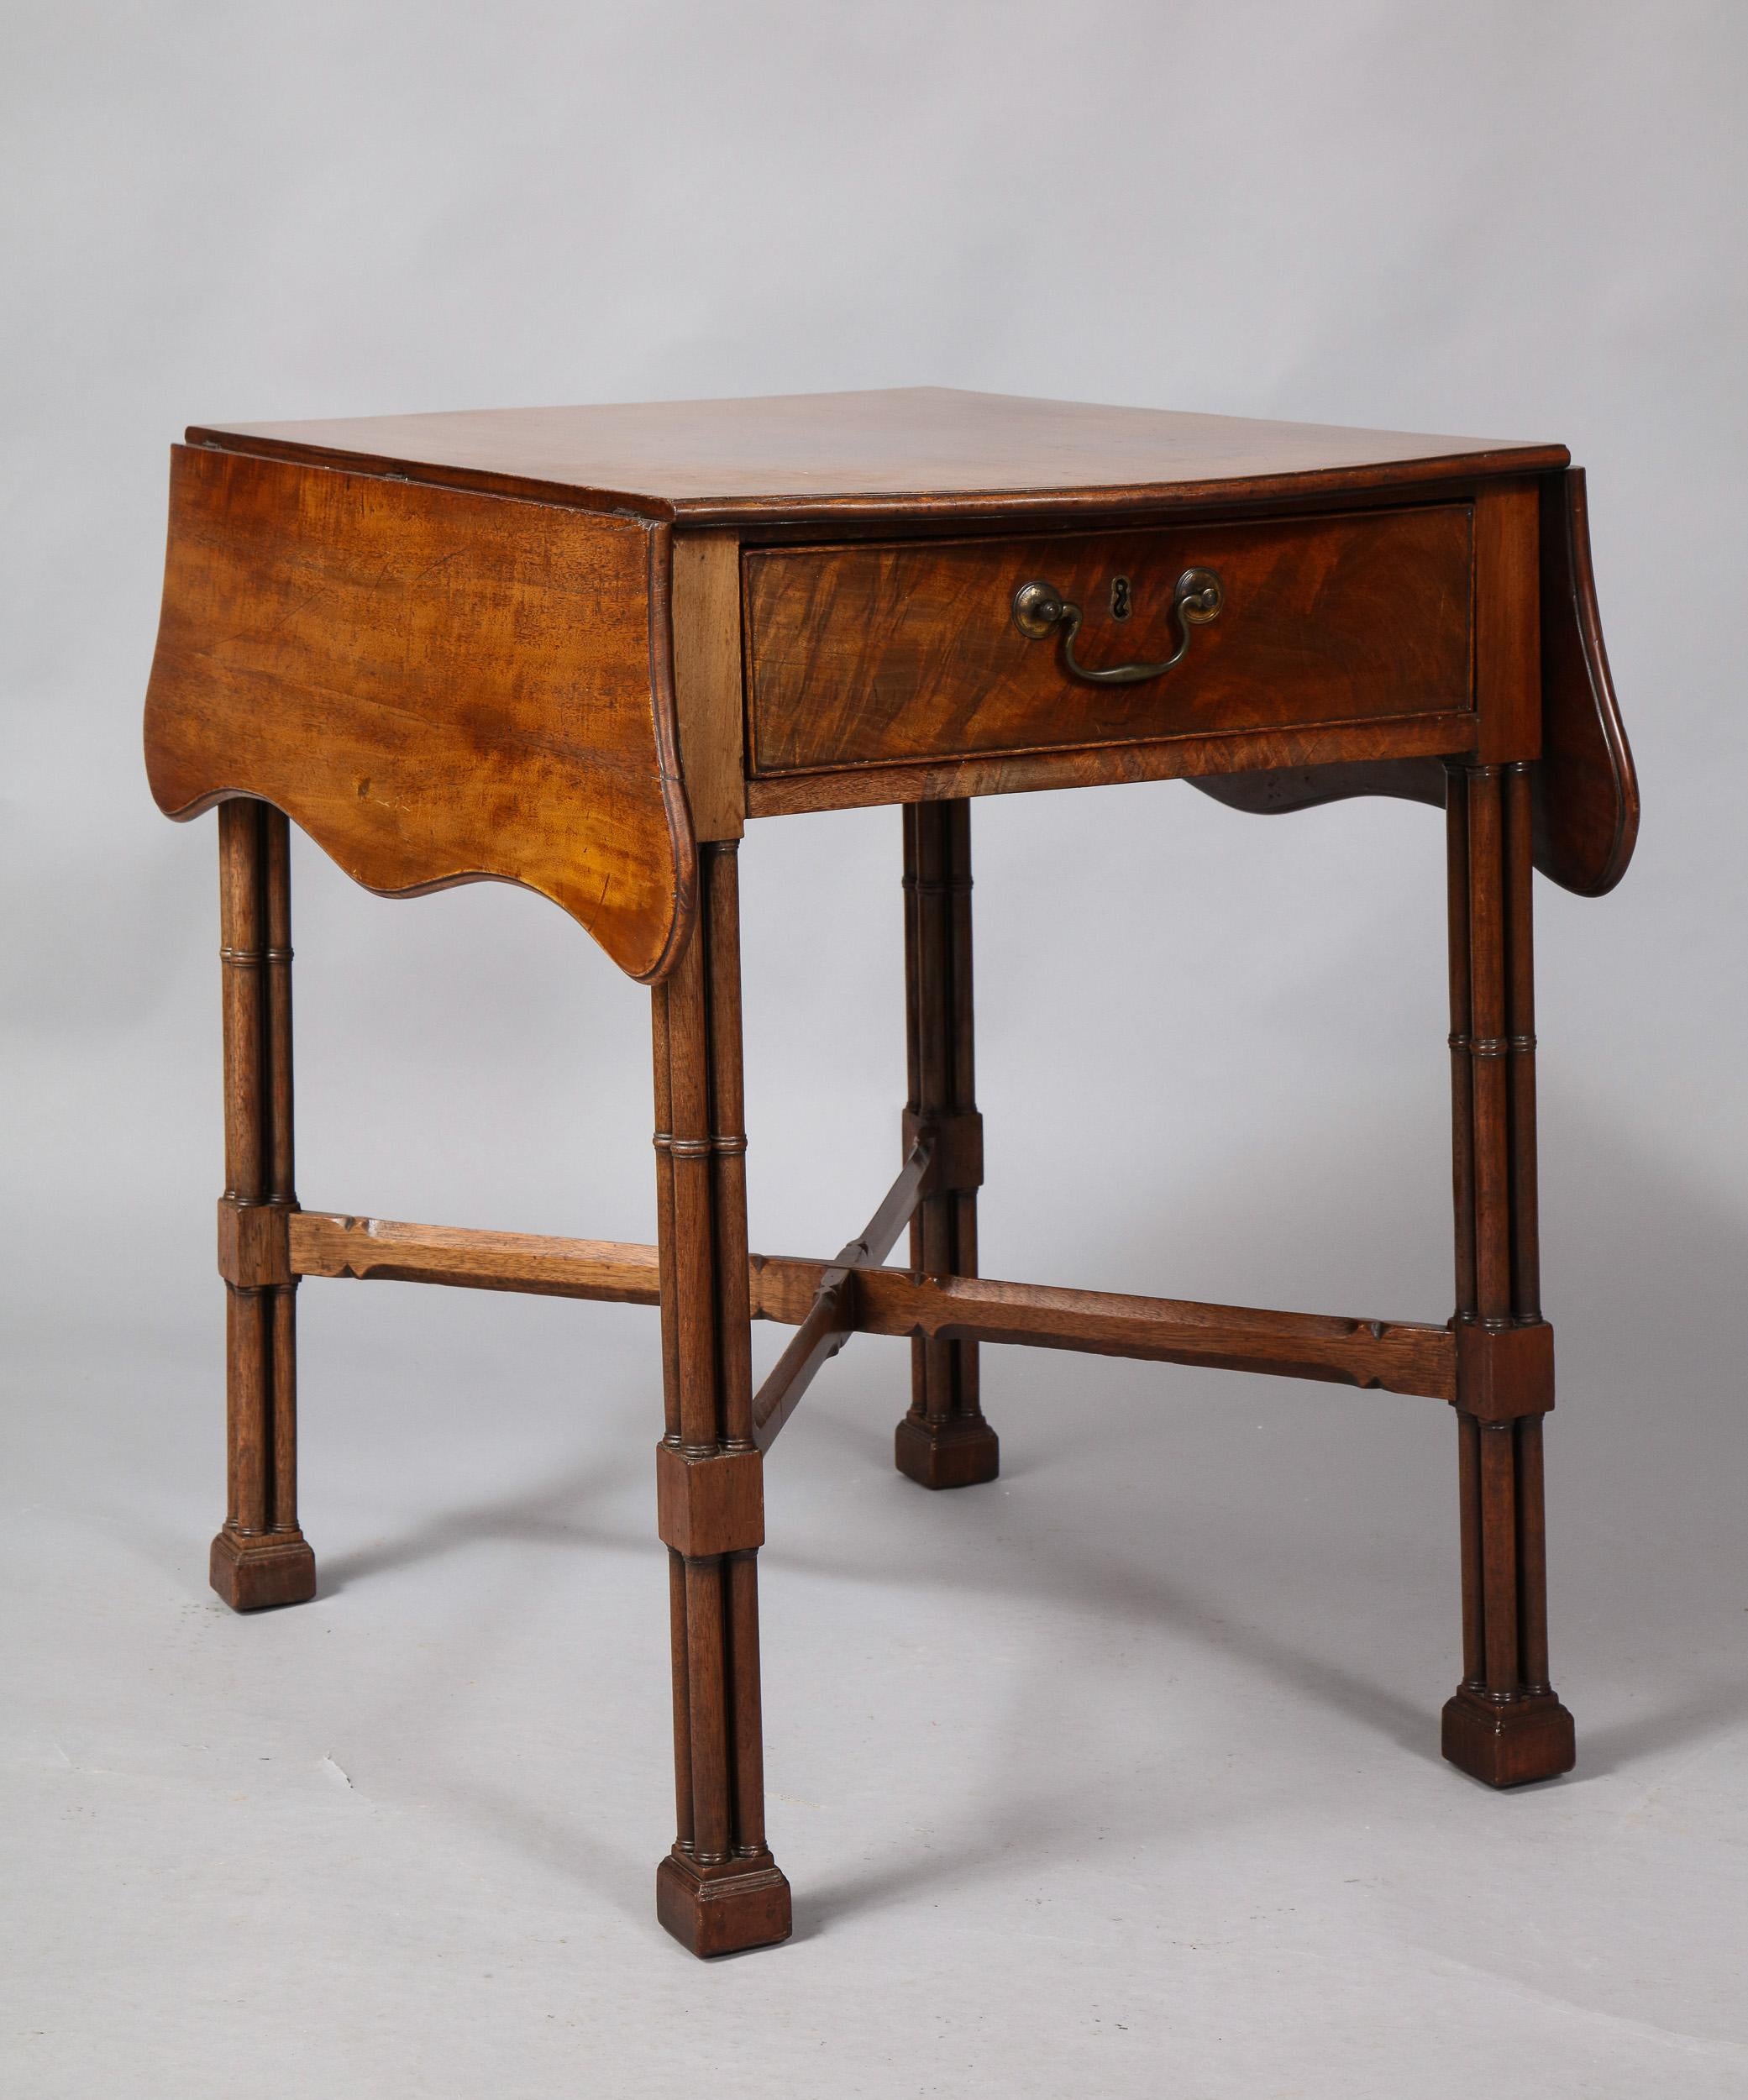 Georgian Pembroke Table in the Manner of Thomas Chippendale 3